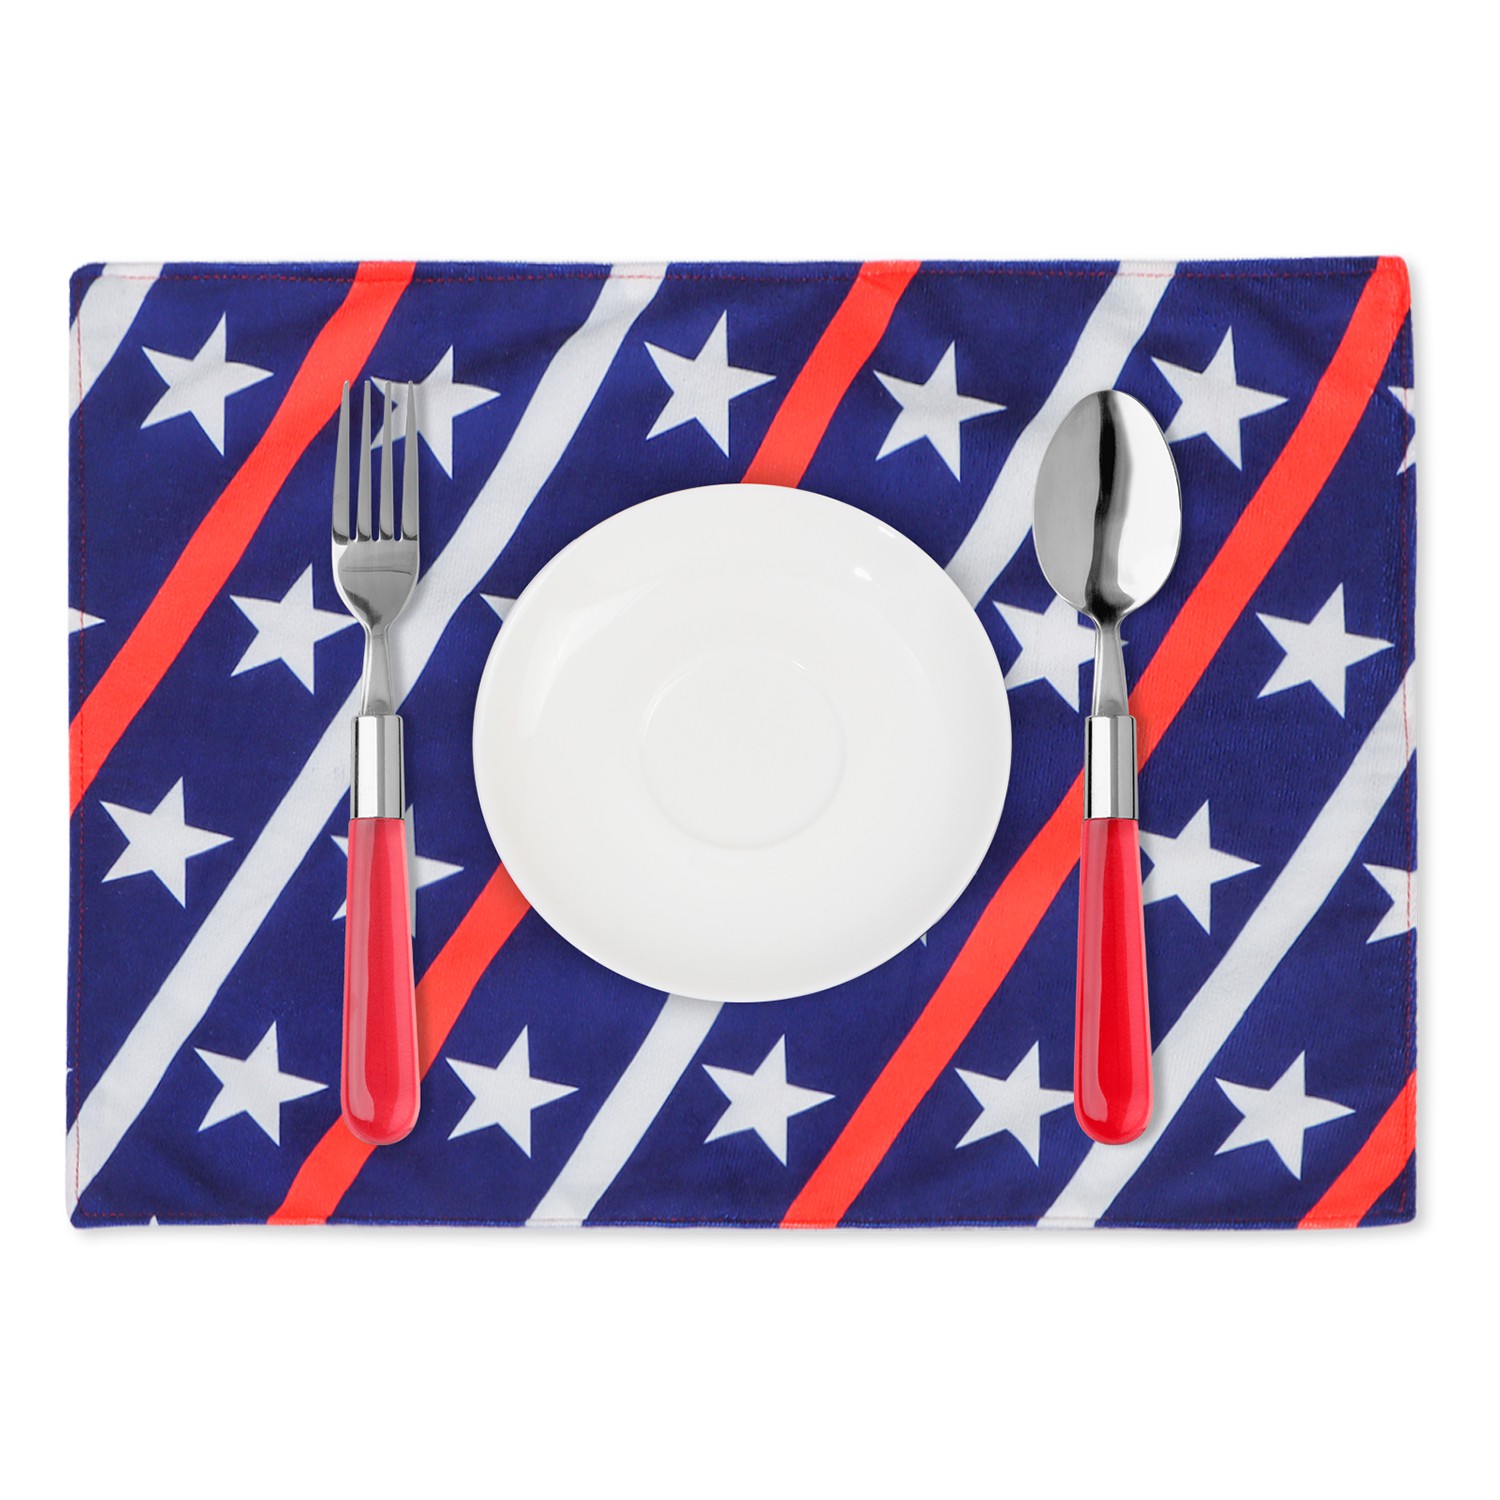 JANE 4pcs/set Table Decor Placemats Heat-Resistant Table Place Mats Independence Day Non-Slip Kitchen Rectangle Washable American Flag